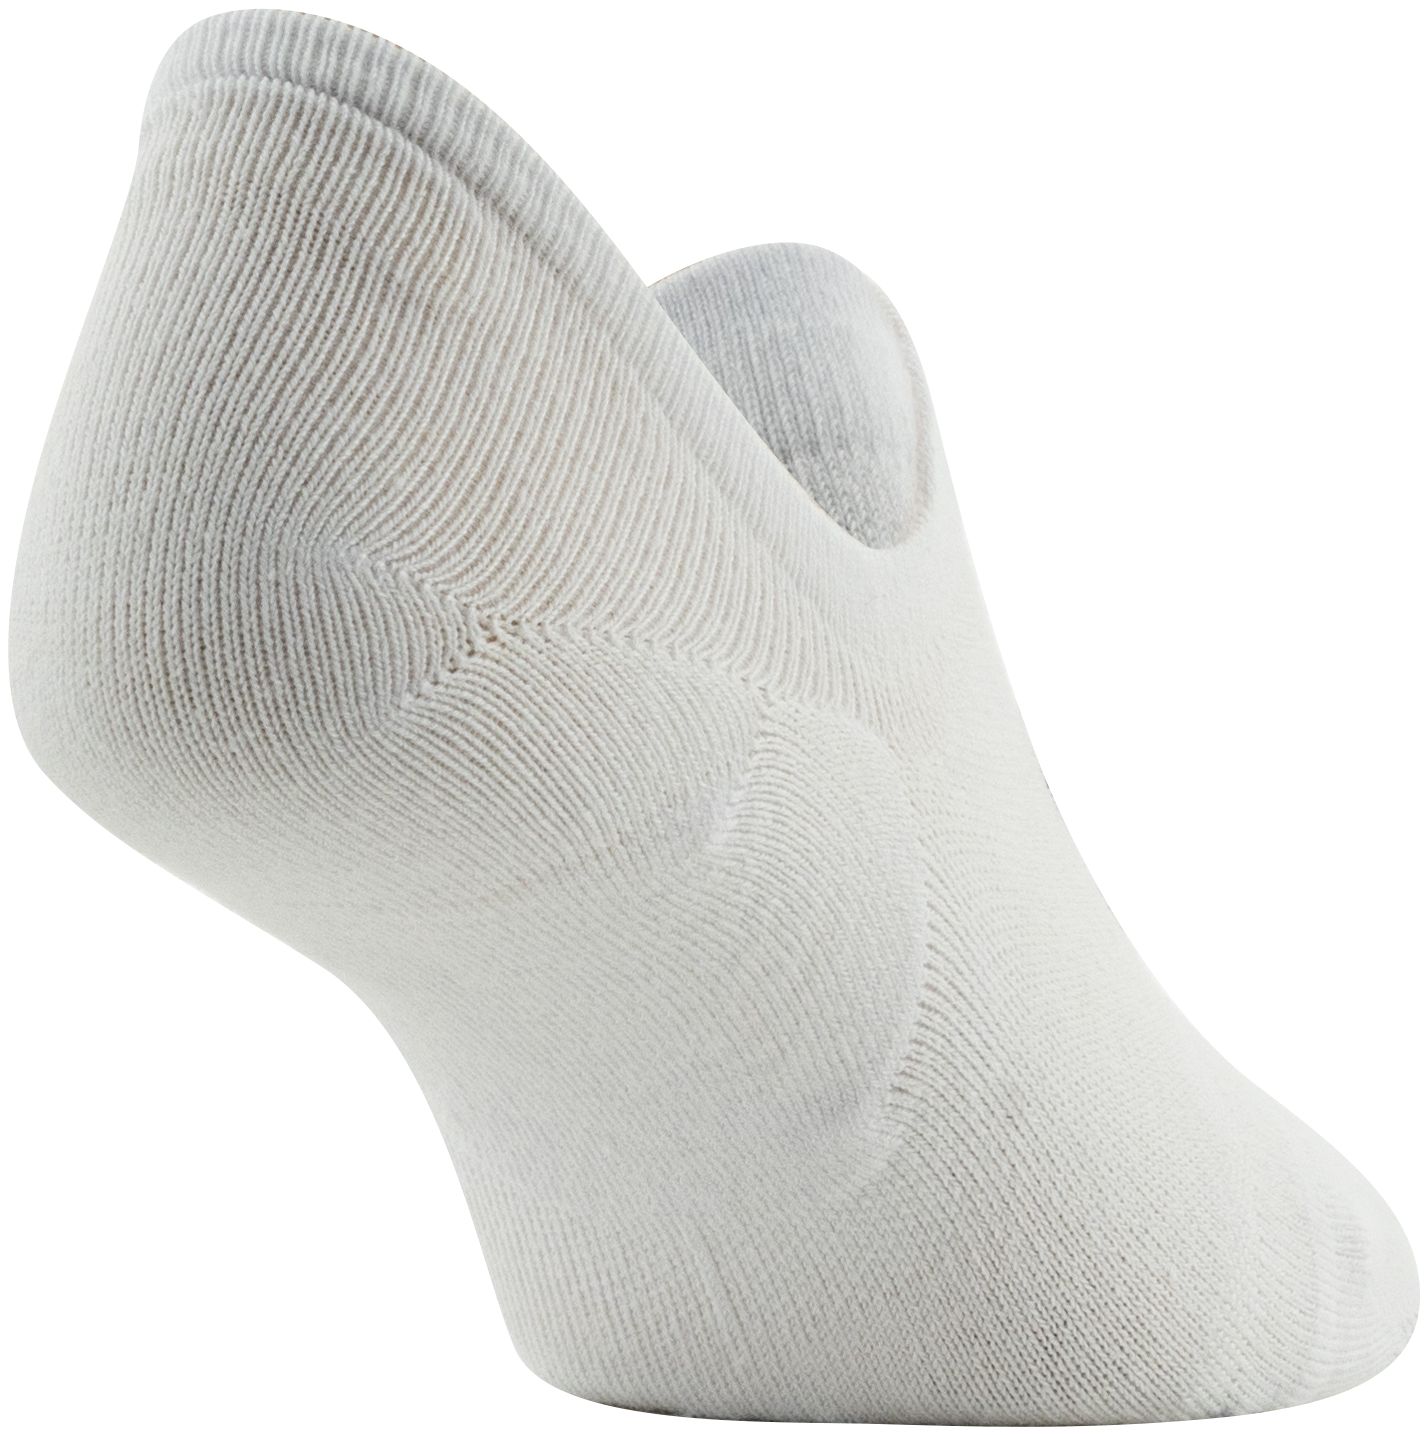 Under Armour Women's Essential Ultra Low Tab Socks - 6 Pack